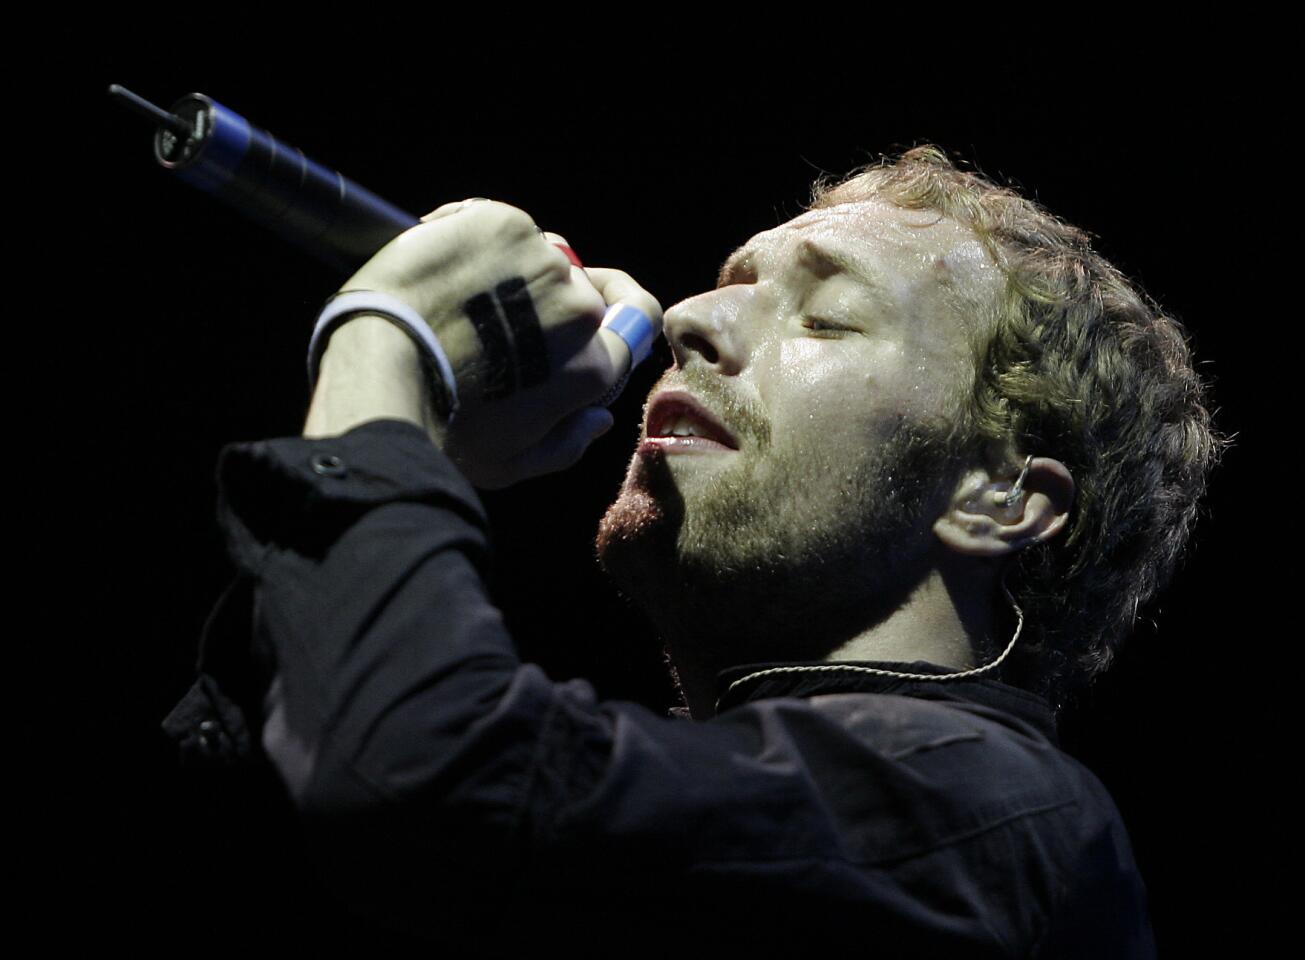 Singer Chris Martin of Coldplay performs during the Coachella Valley Music and Arts Festival, 2005.